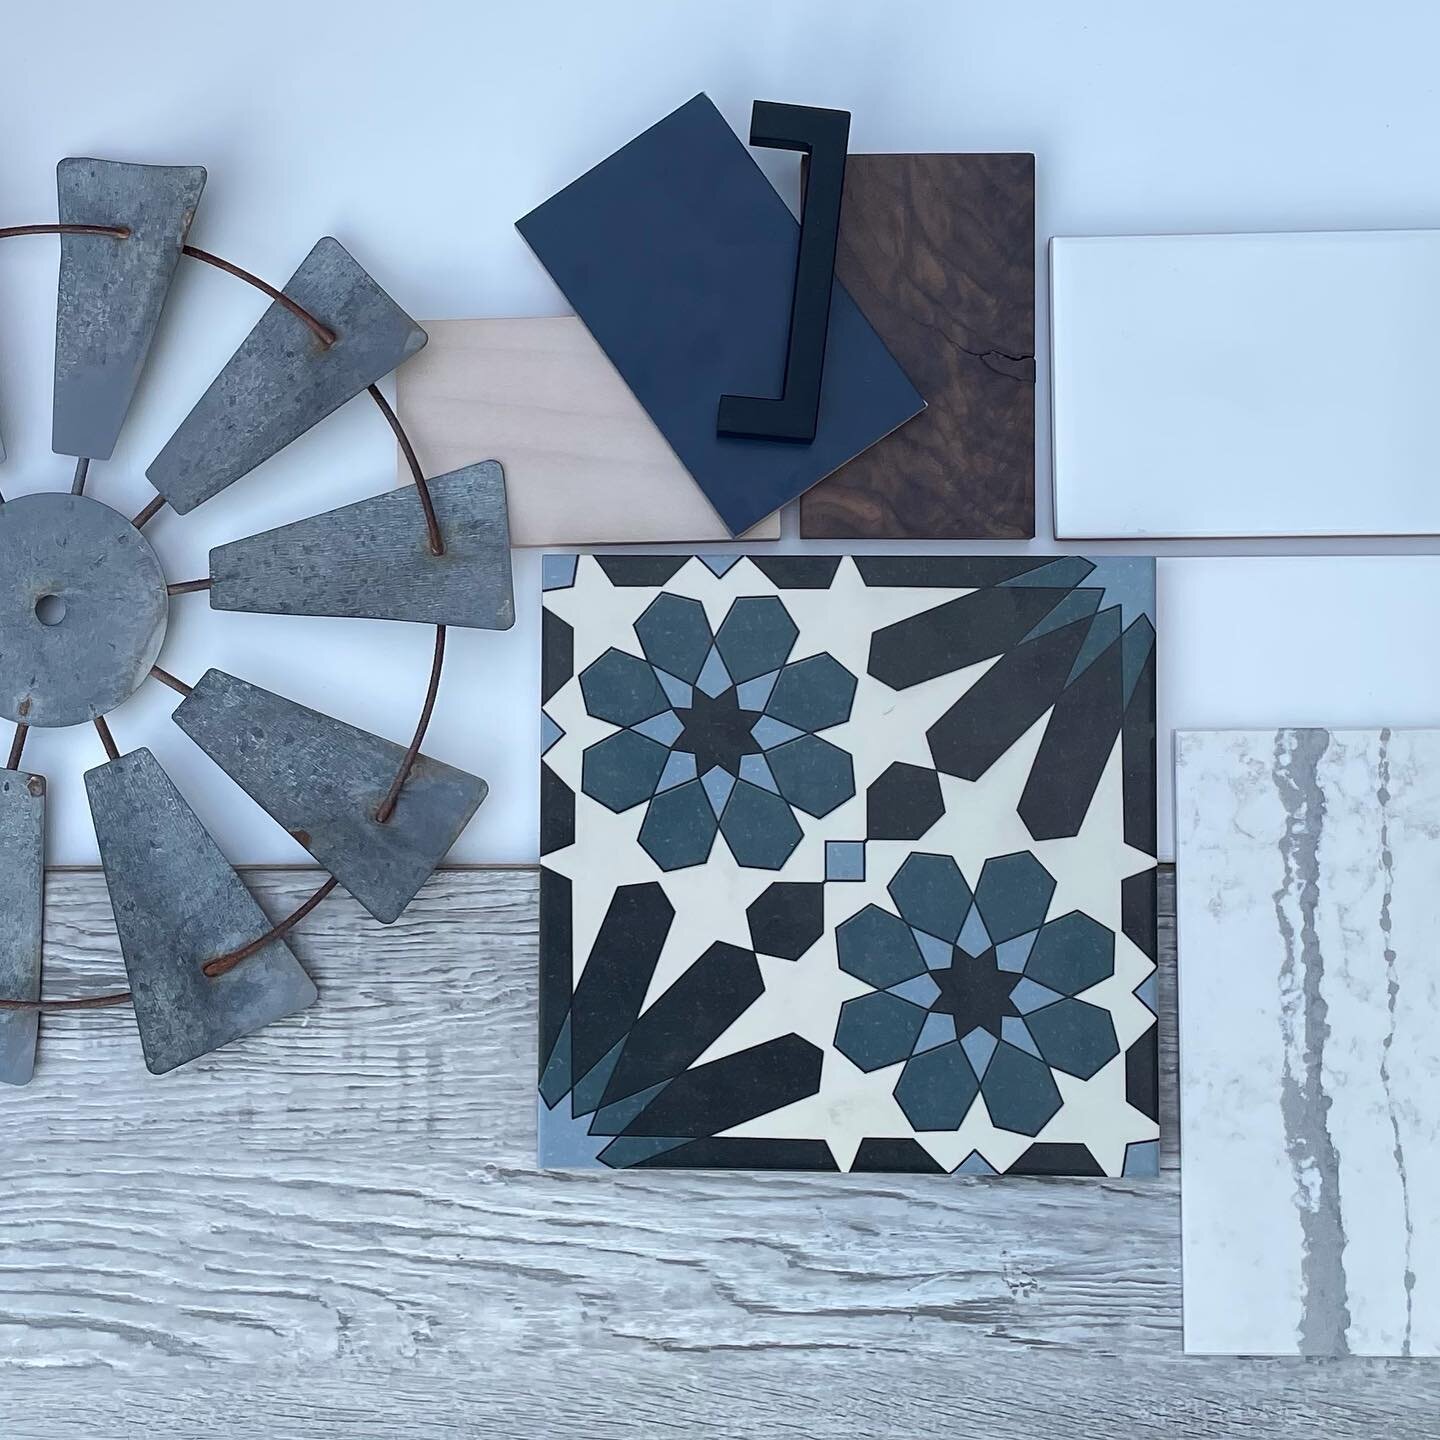 Decisions! Decisions! What patterned tile should we do? Both are a fun, colorful look that pulls the vintage kitchen together. Vote in the comments!! #kitchenremodel #kitchendesign #patternedtiles #vintagekitchen #flooranddecor #silestone #lvpfloorin